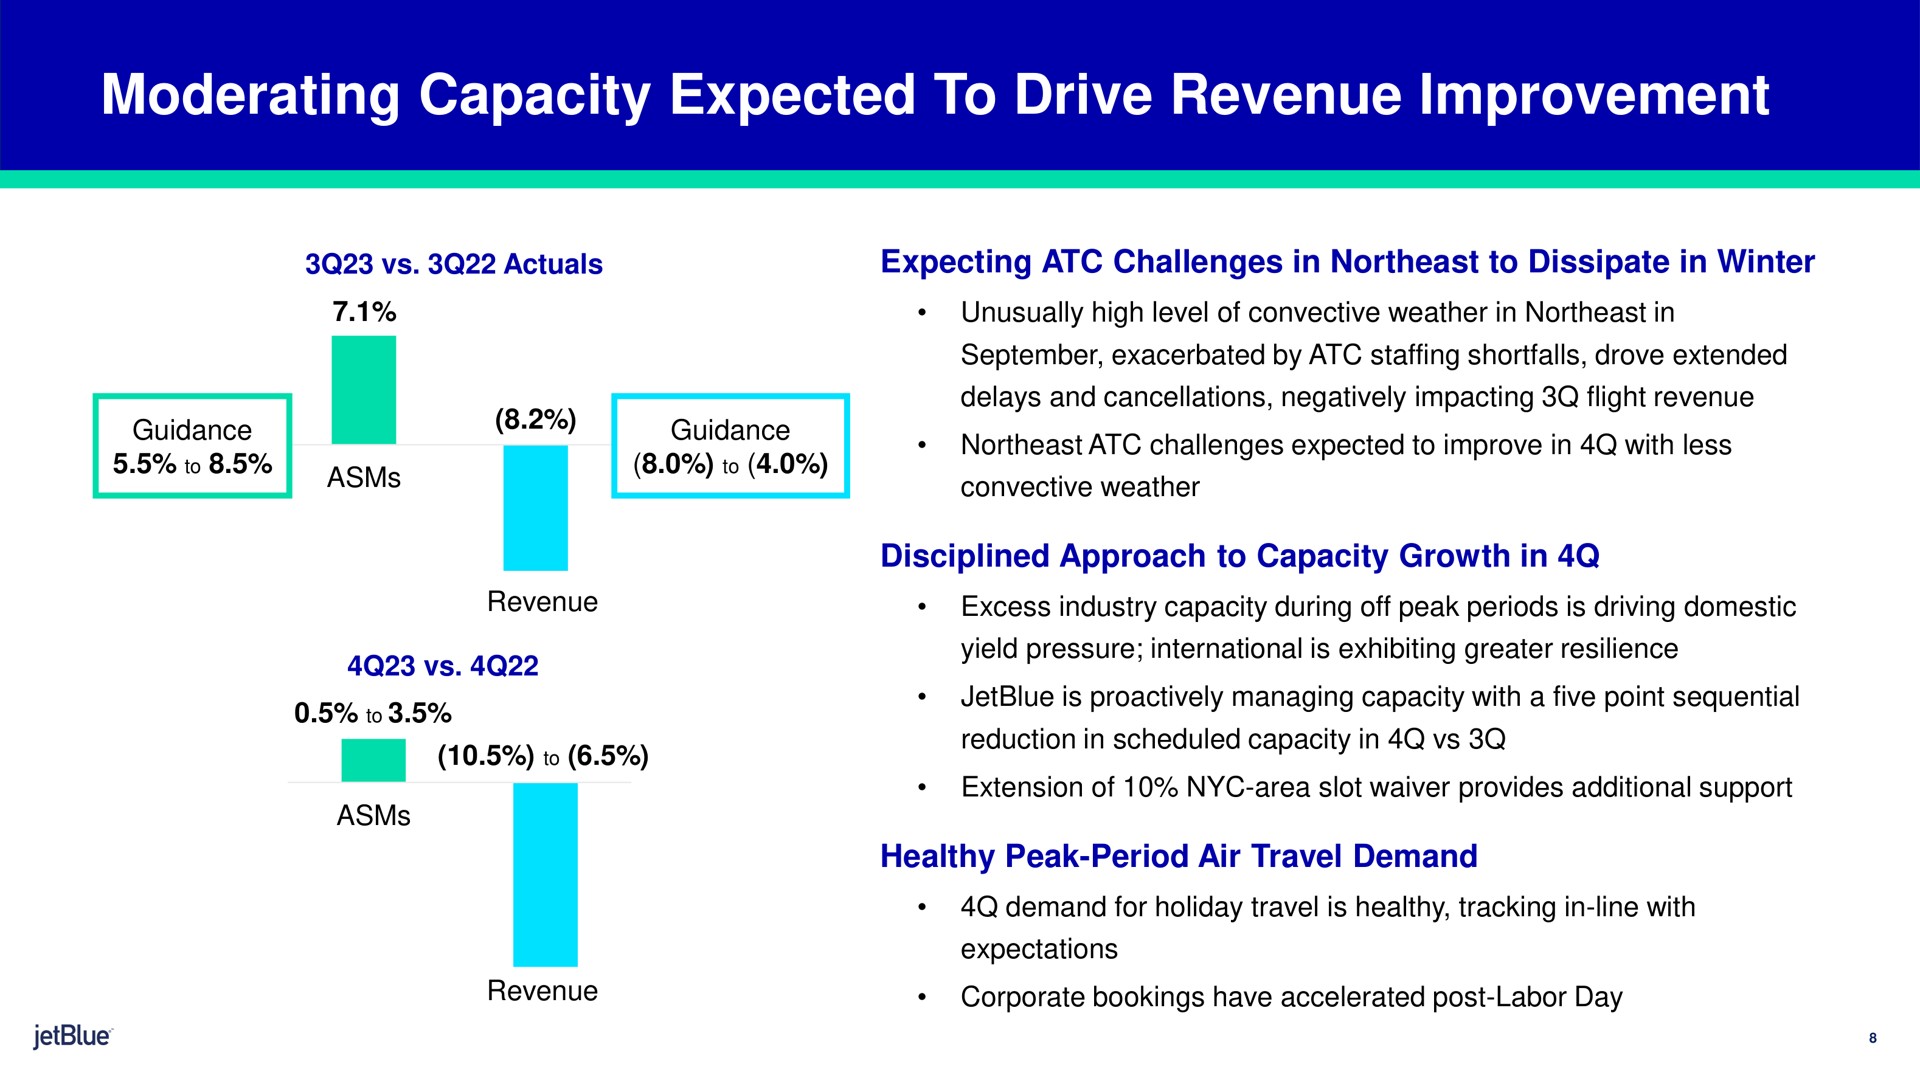 moderating capacity expected to drive revenue improvement expecting challenges in northeast to dissipate in winter disciplined approach to capacity growth in healthy peak period air travel demand | jetBlue